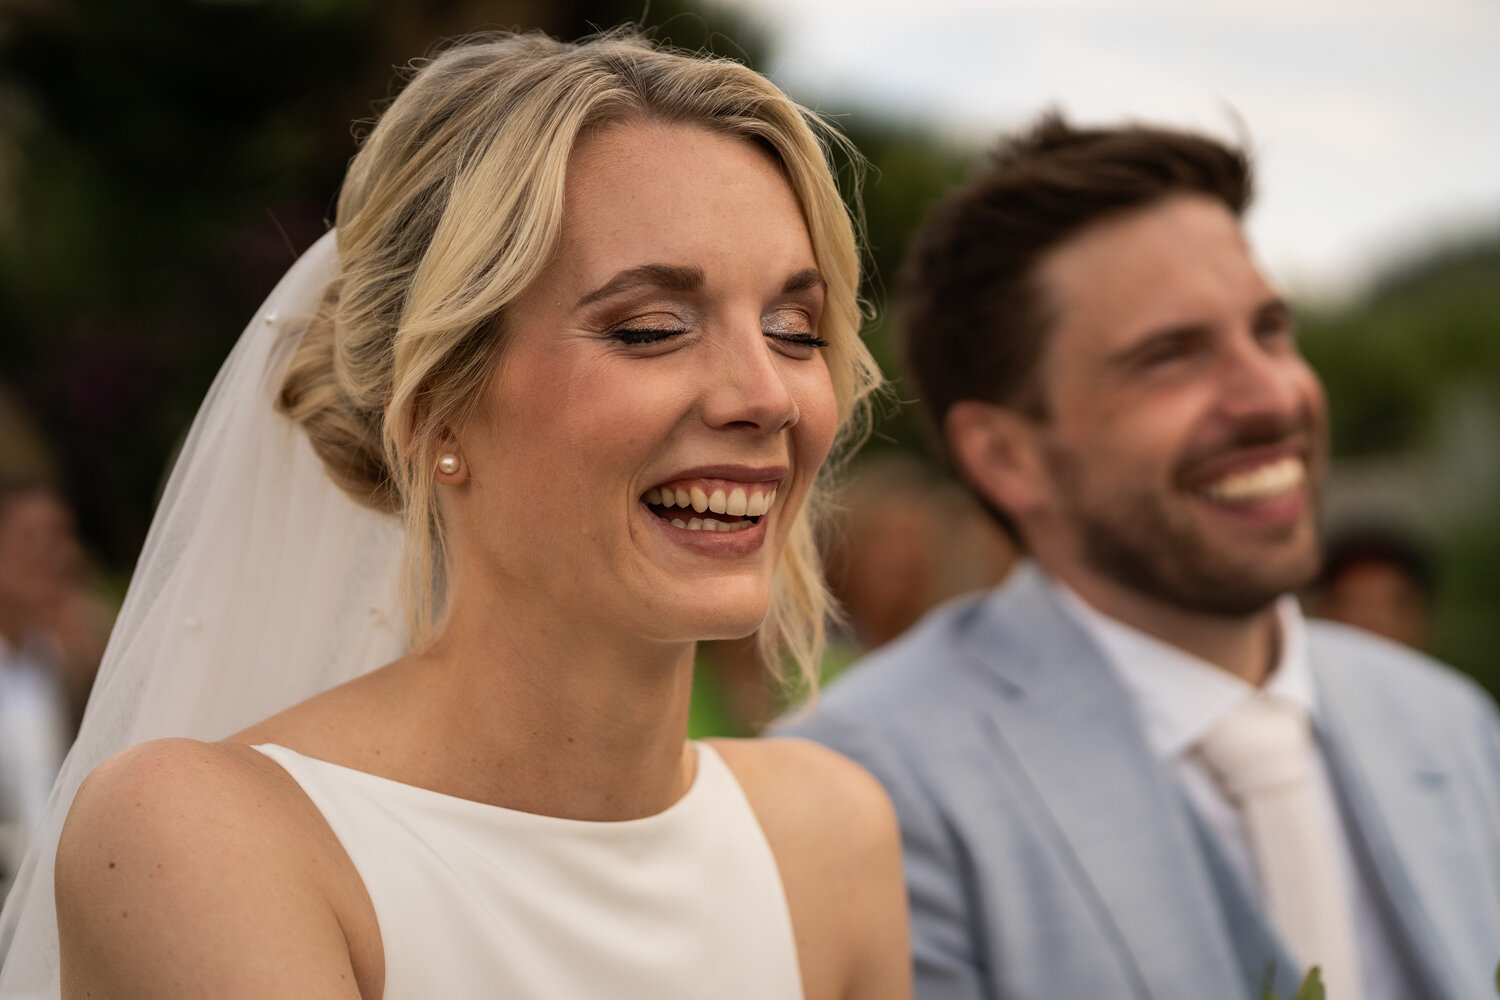 Smiles and tears 

From G&amp;P's wedding in @bagliostrafalcello in Sicily 

#weddingphotography #intimatewedding #internationalwedding #fotografamatrimonio #weddingphotographer  #destinationweddingitaly #intimatestorytellers #weddingphotographer #we